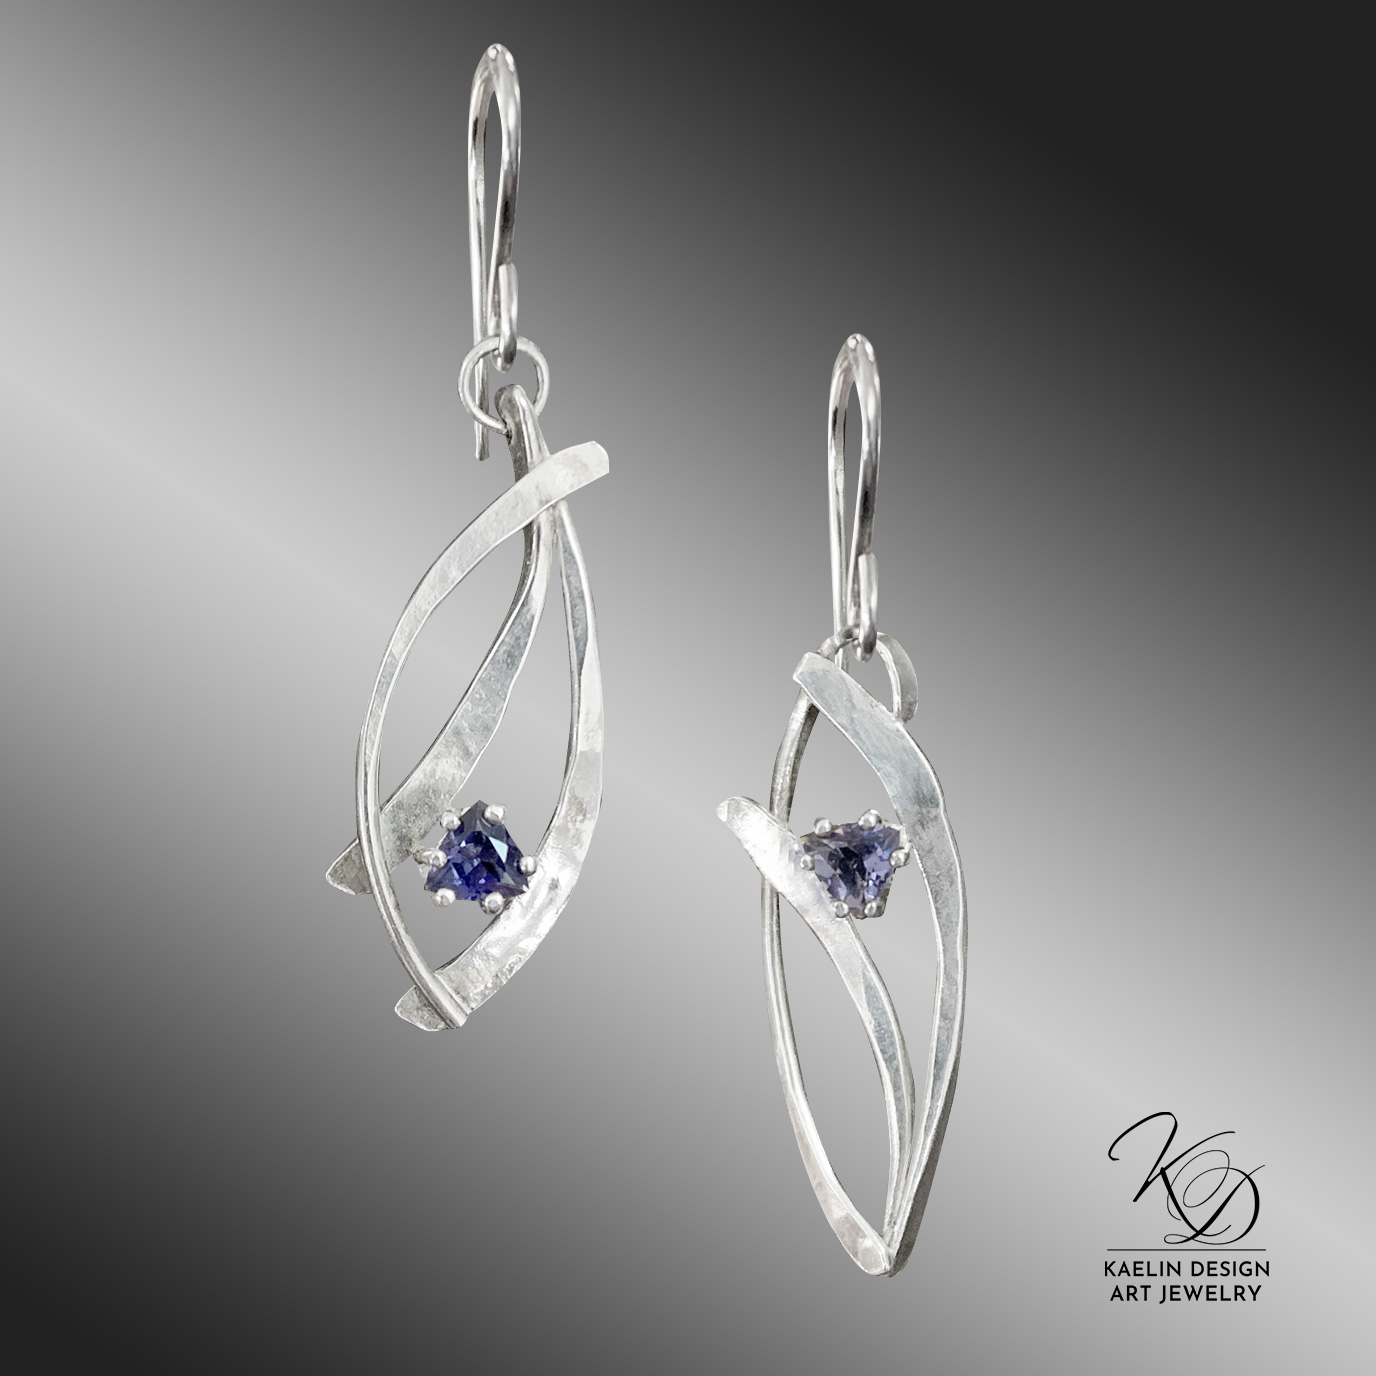 Effervescent Iolite Sterling Silver Hand Forged Art jewelry Earrings by Kaelin Design